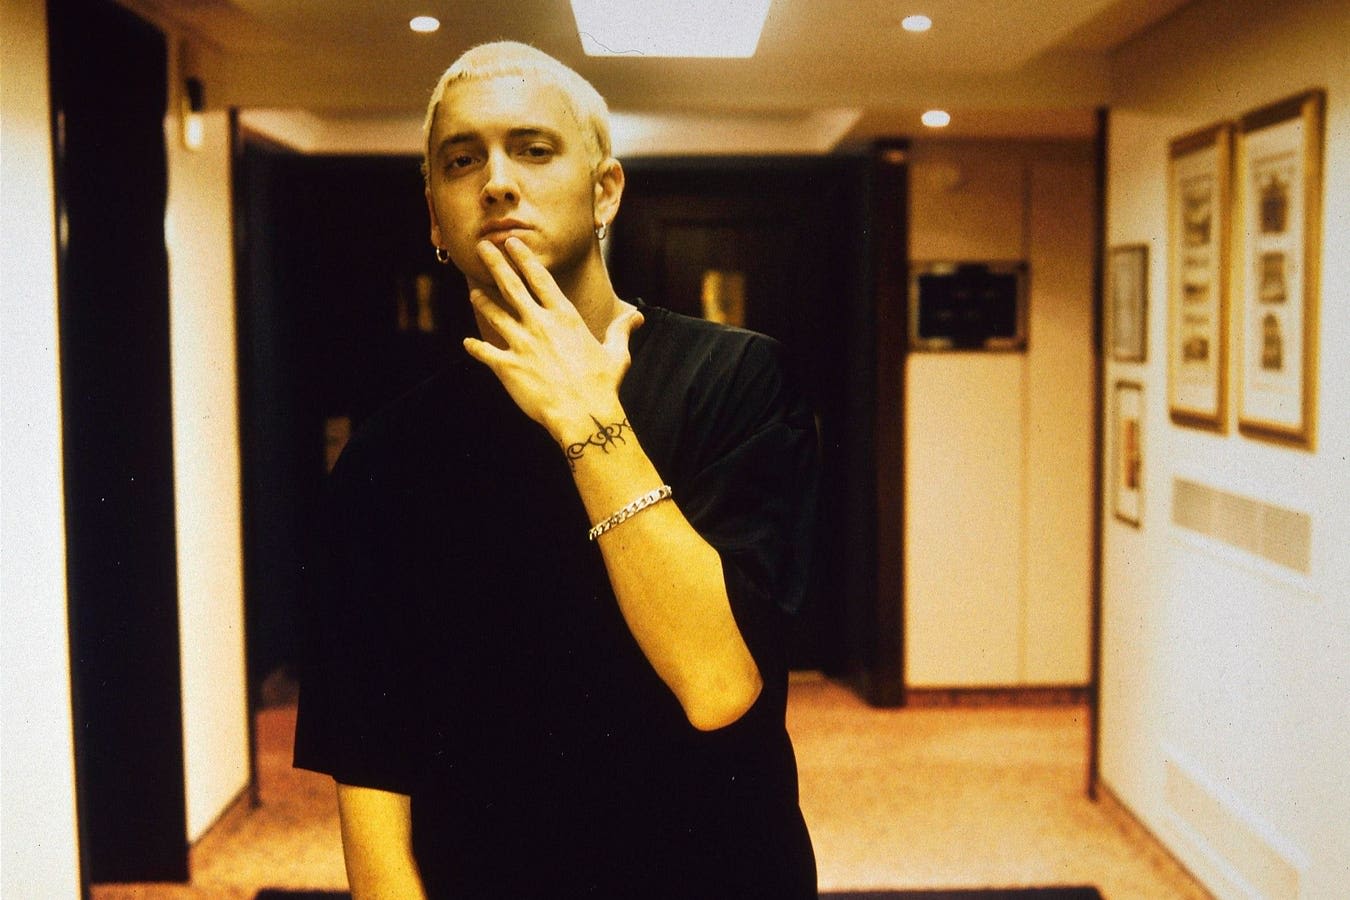 Eminem’s Latest Top 10 Smash Manages A Very Impressive Feat